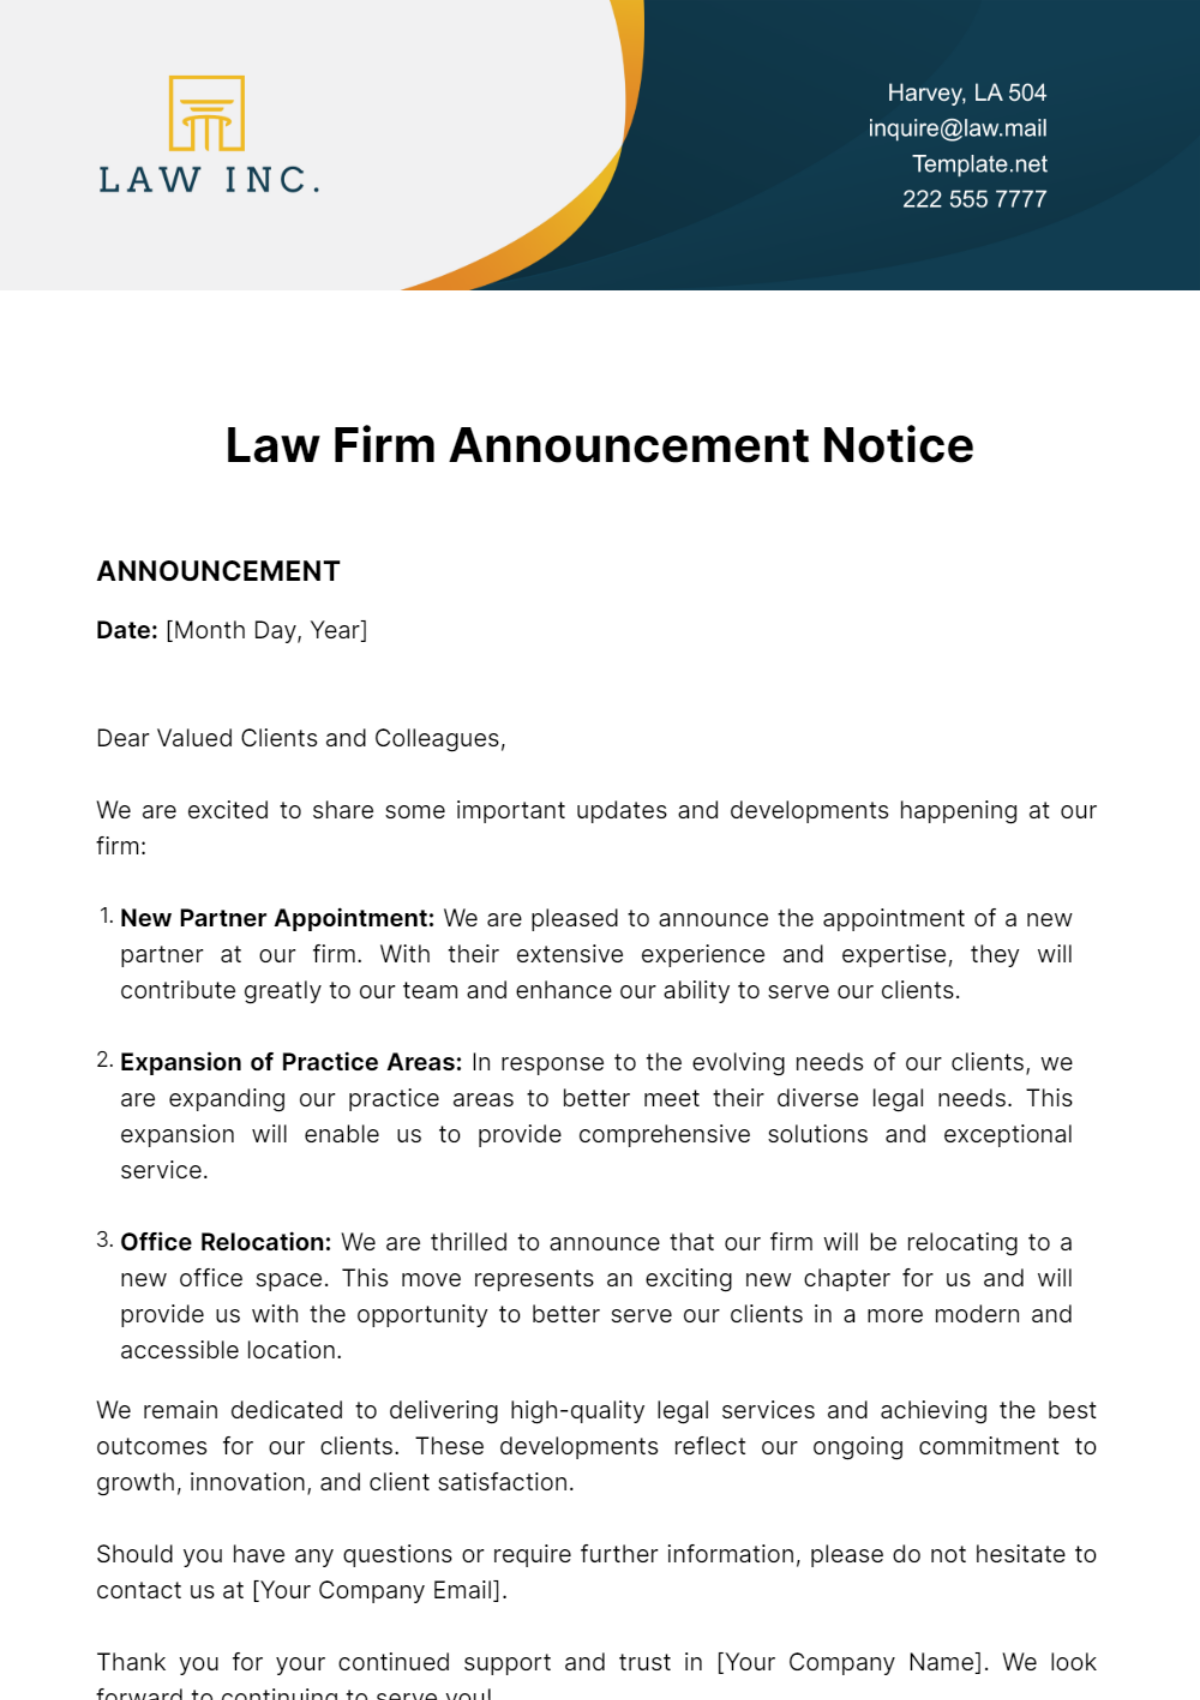 Law Firm Announcement Notice Template